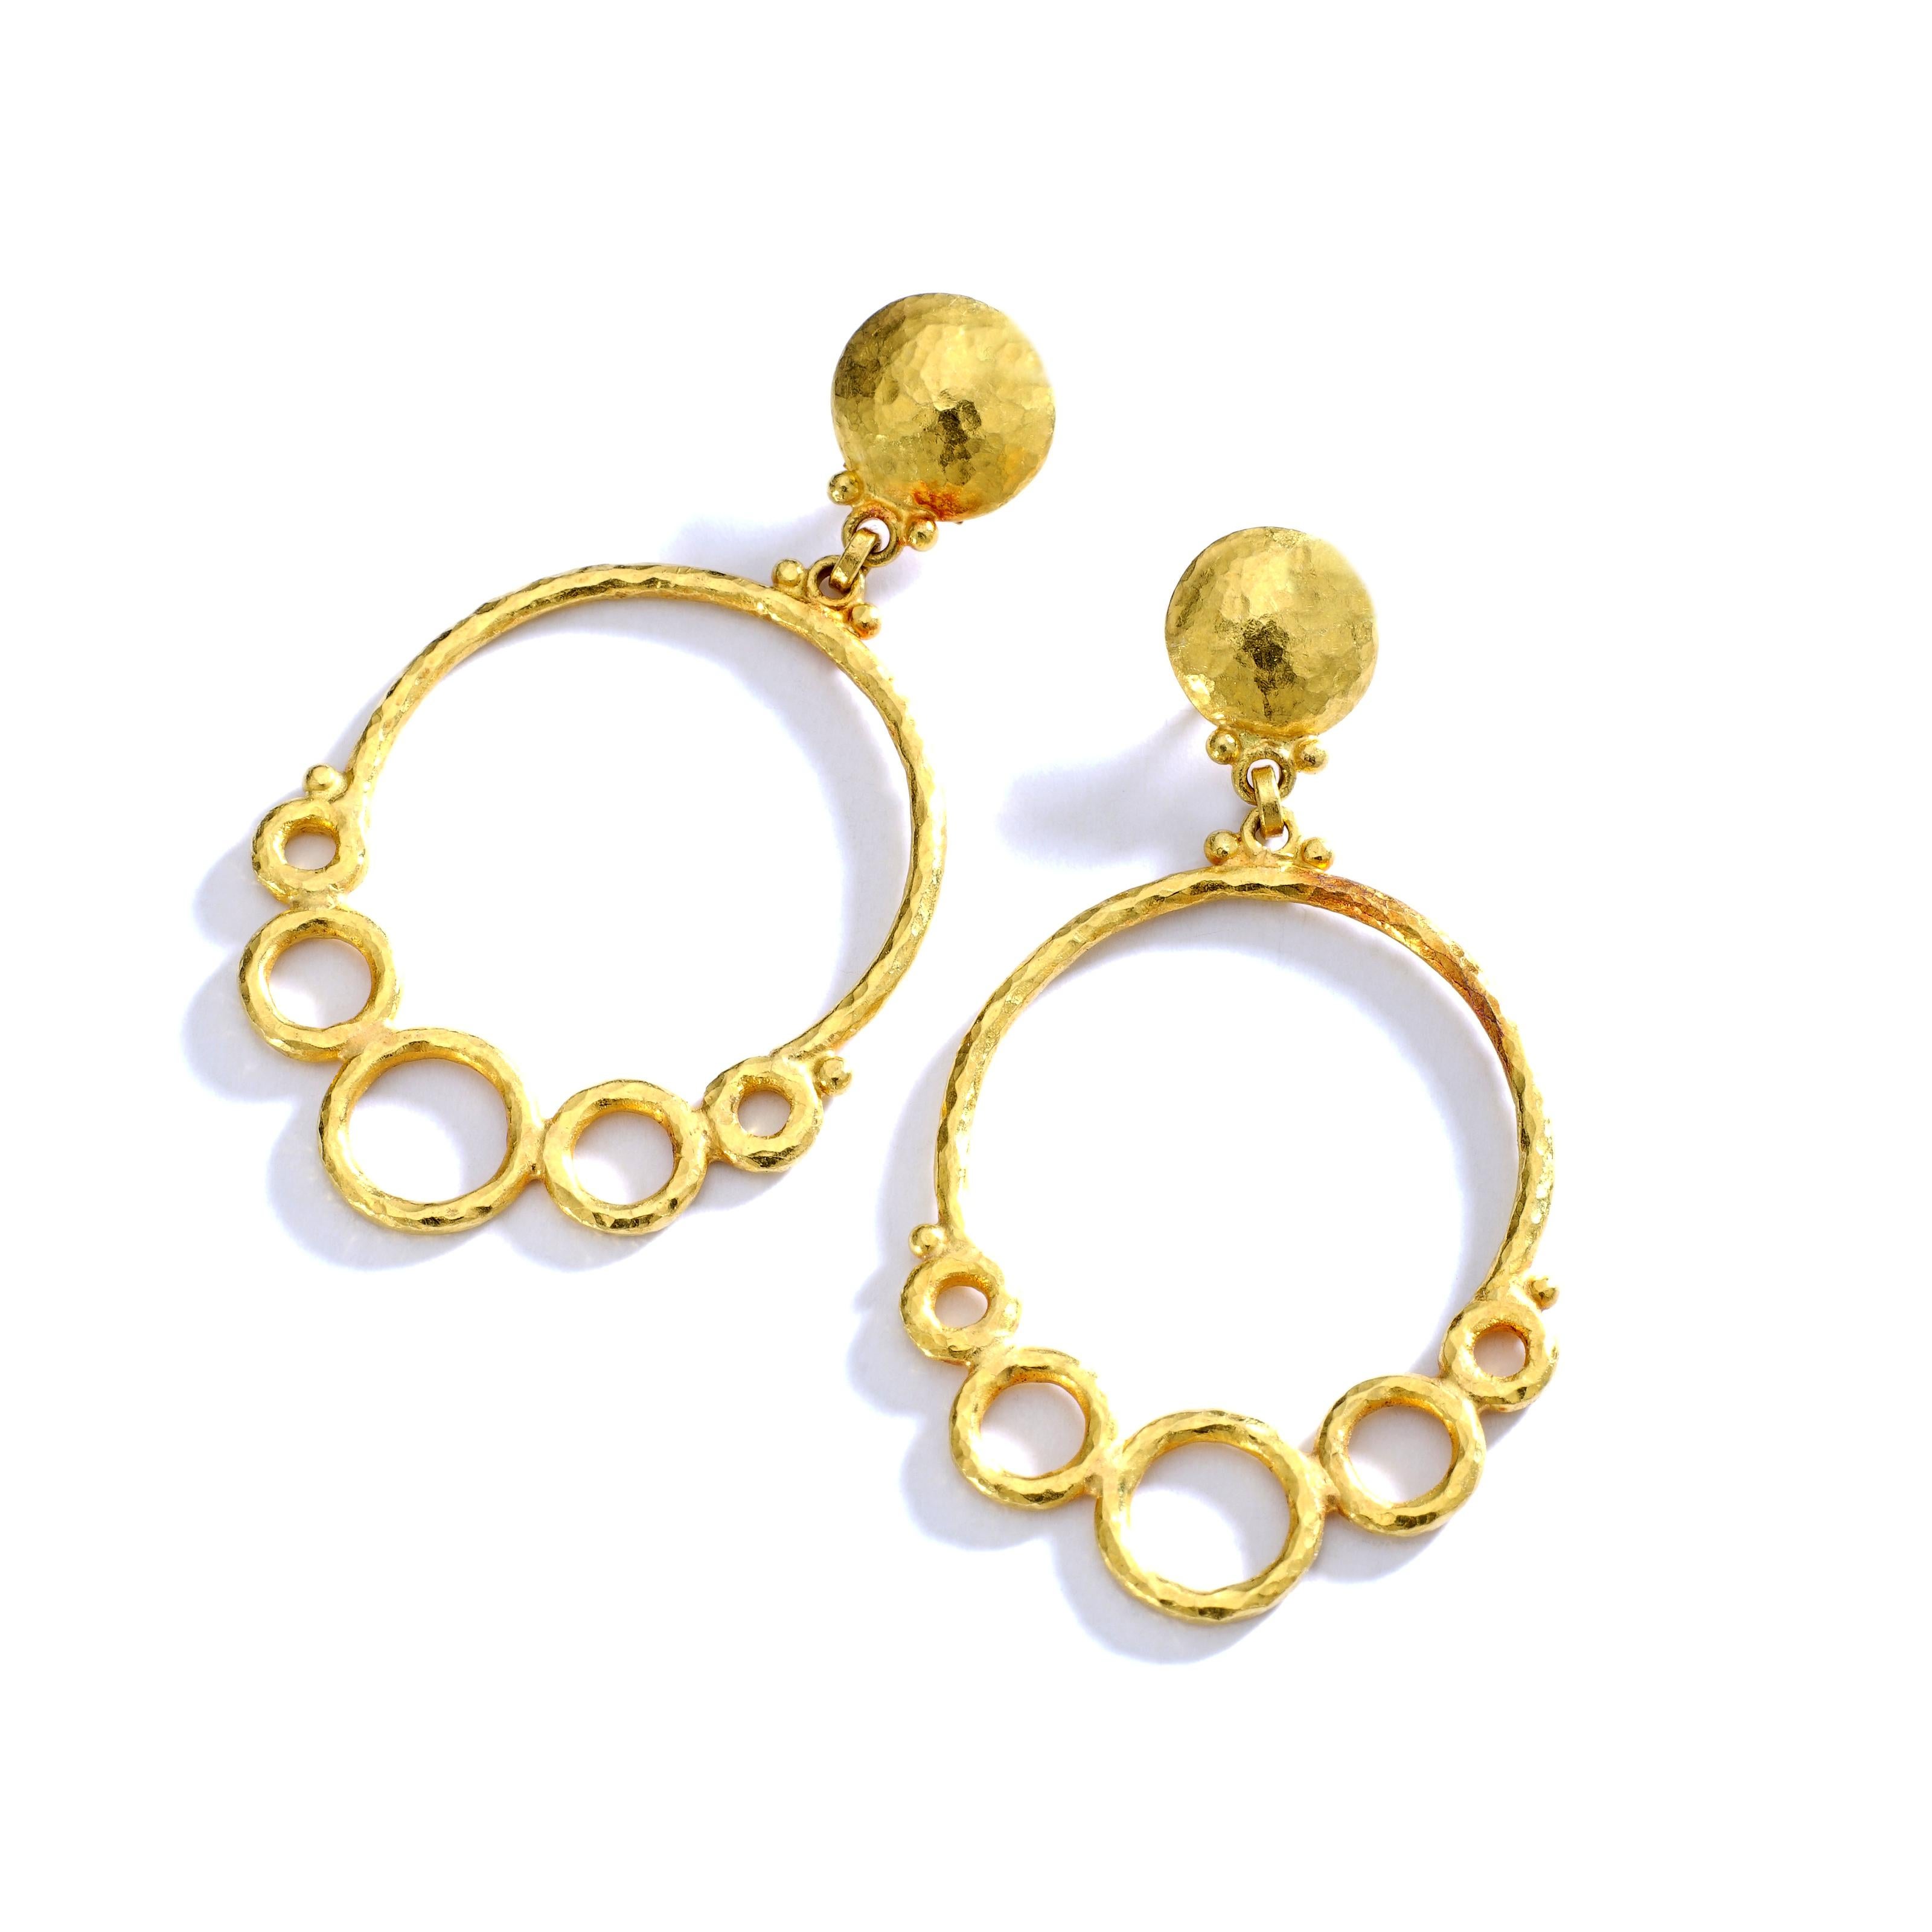 Yellow Gold Etruscan Revival design Earrings.
Signed Gurman.

Total height: 4.50 cm.
Total width max. : 2.50 cm.
Total weight: 8.17 grams.
